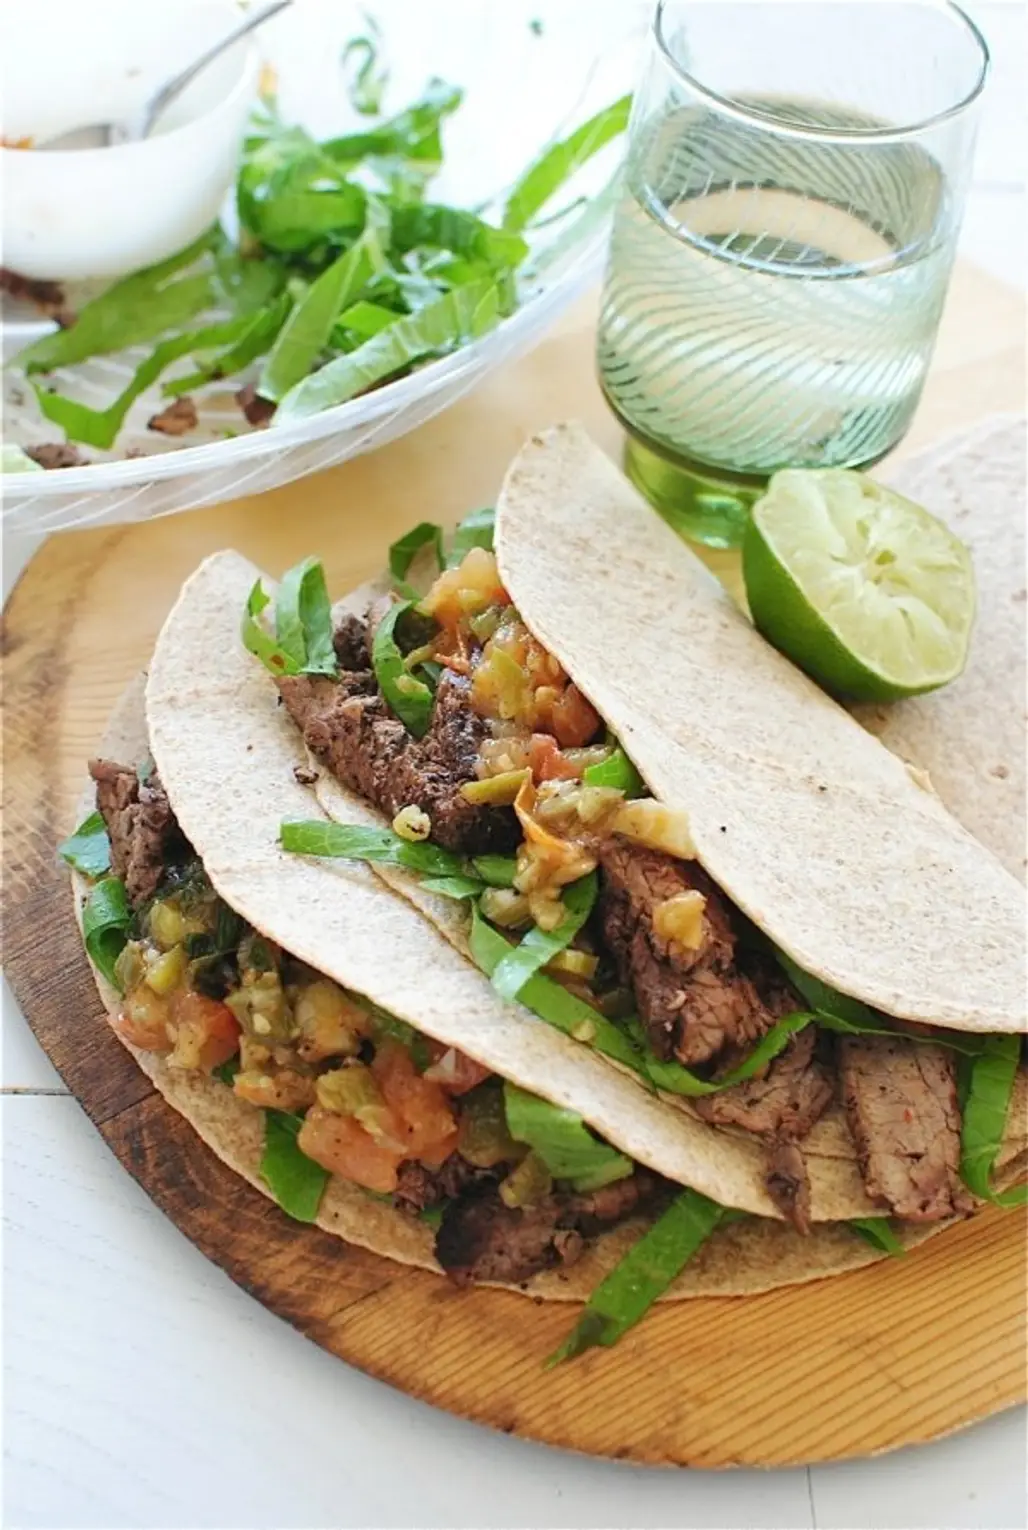 Spicy Beef and Black Bean Soft Tacos with Cucumber, Tomato and Lime Salsa